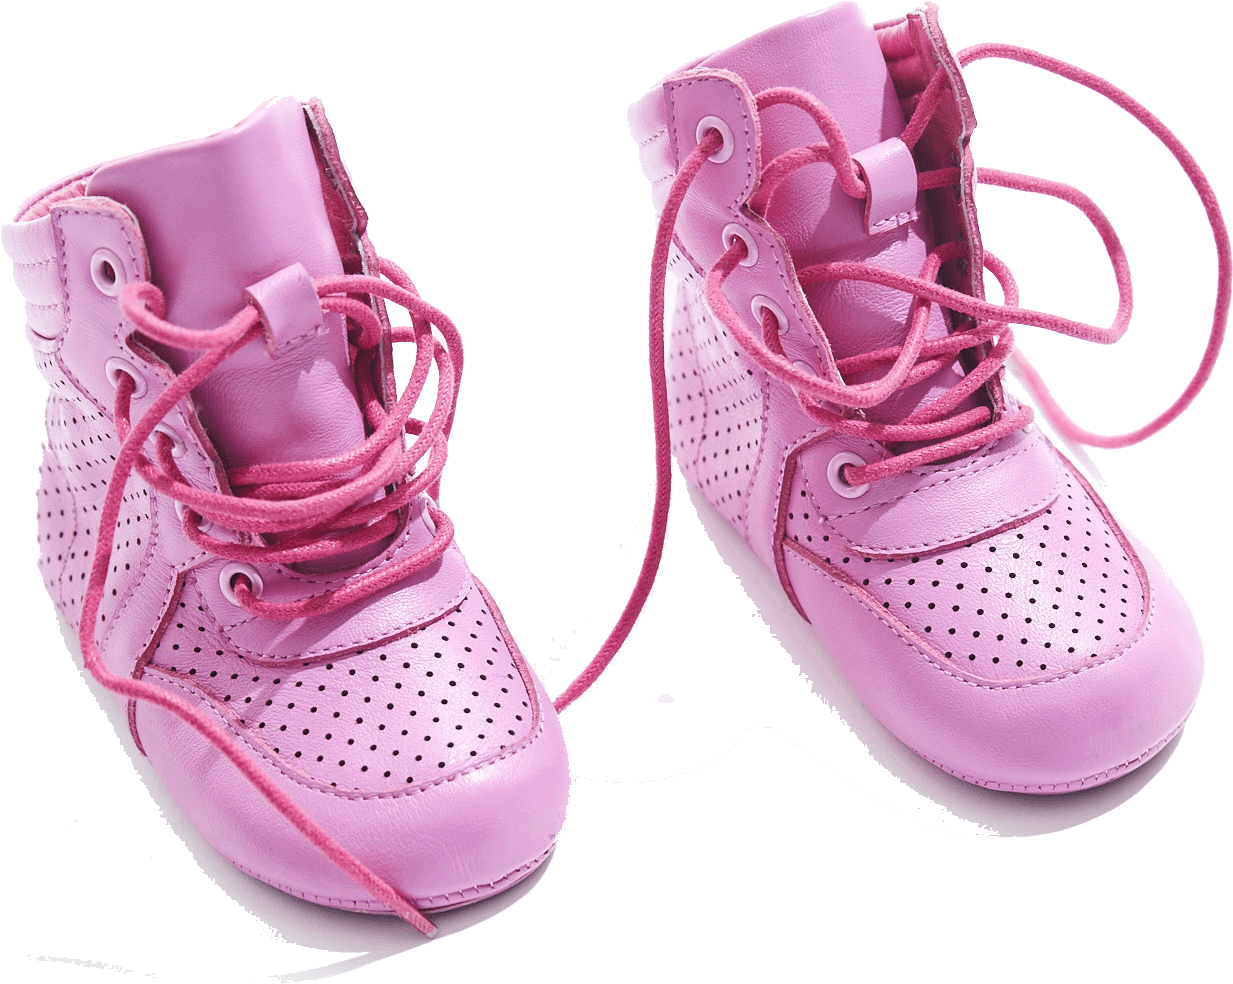 A Pair Of Pink Shoes